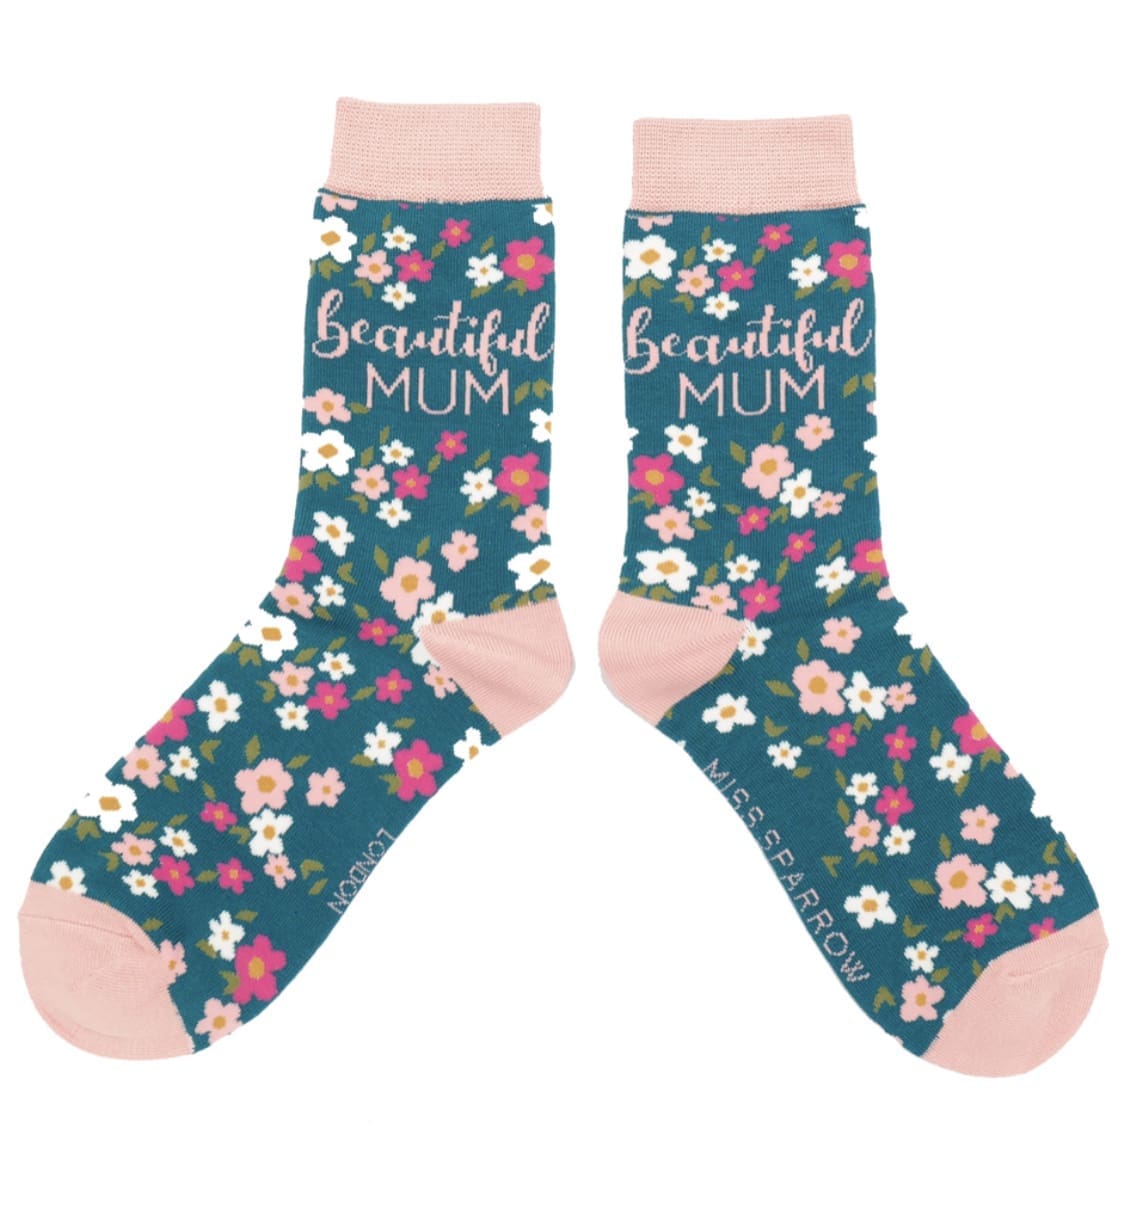 A pair of socks with the words'beautiful mum'on them.